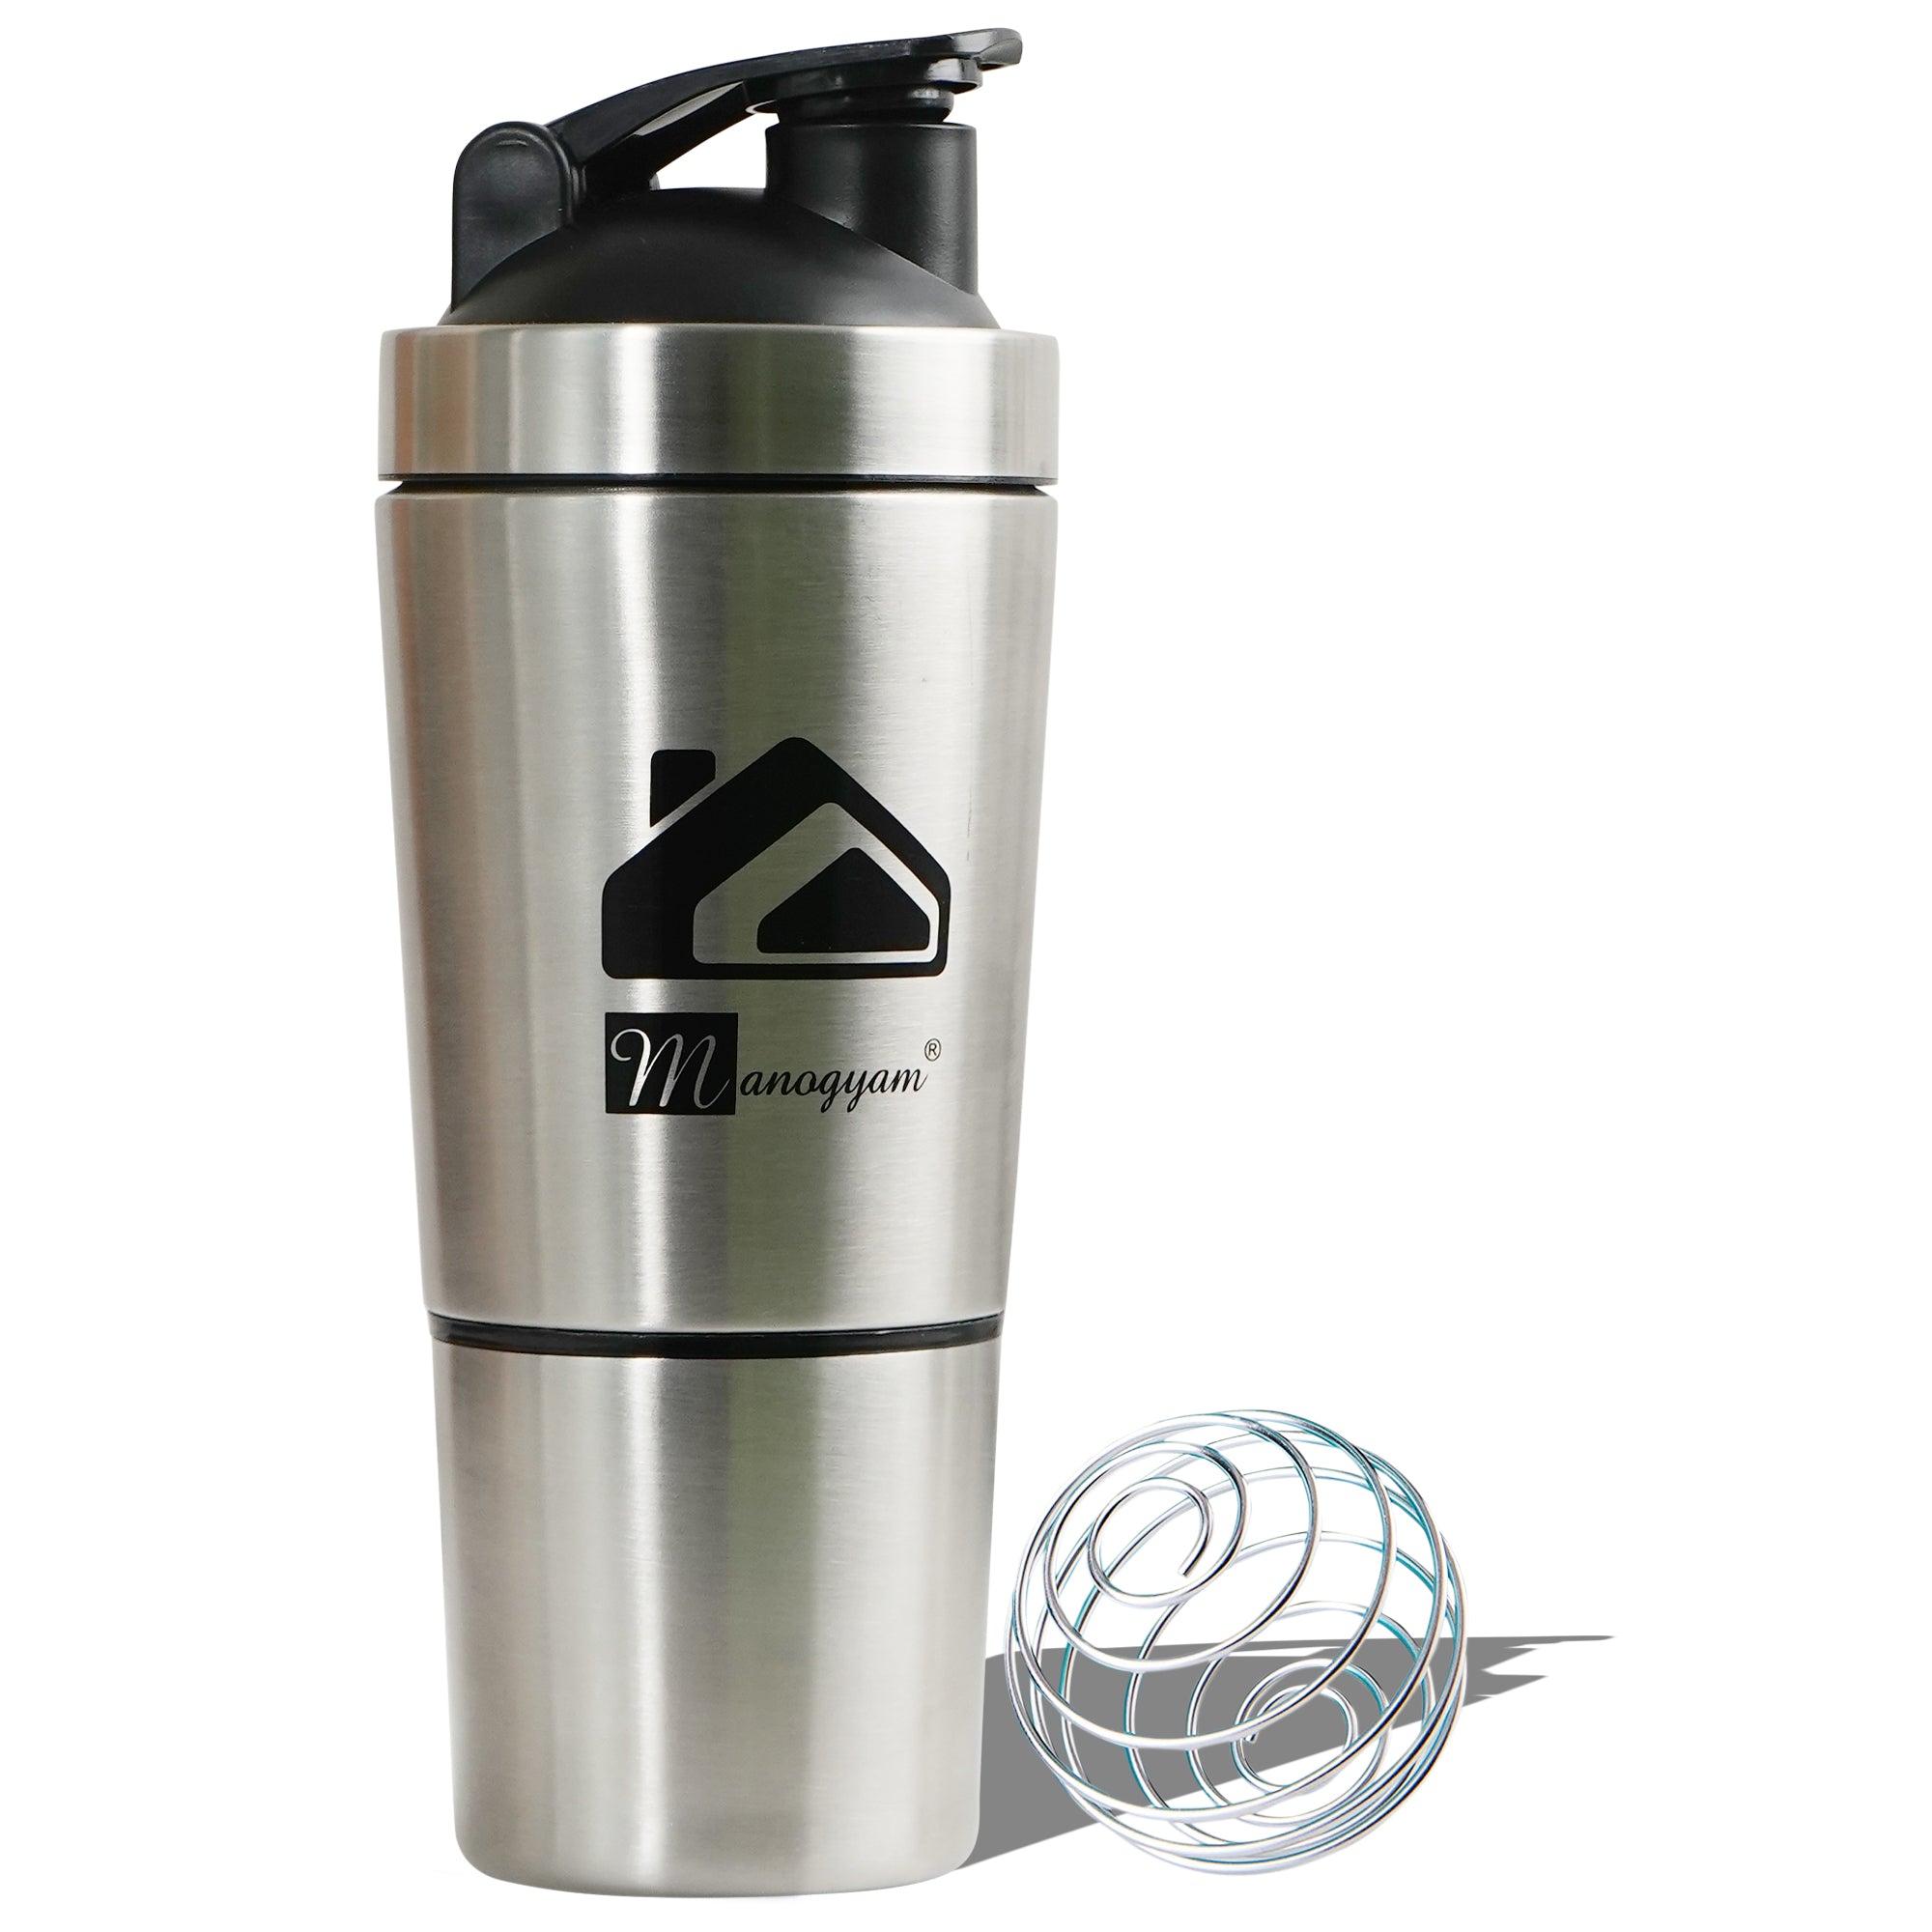 Stainless Steel All-Purpose Bottle & Shaker: Durability and Versatility 6.5 L